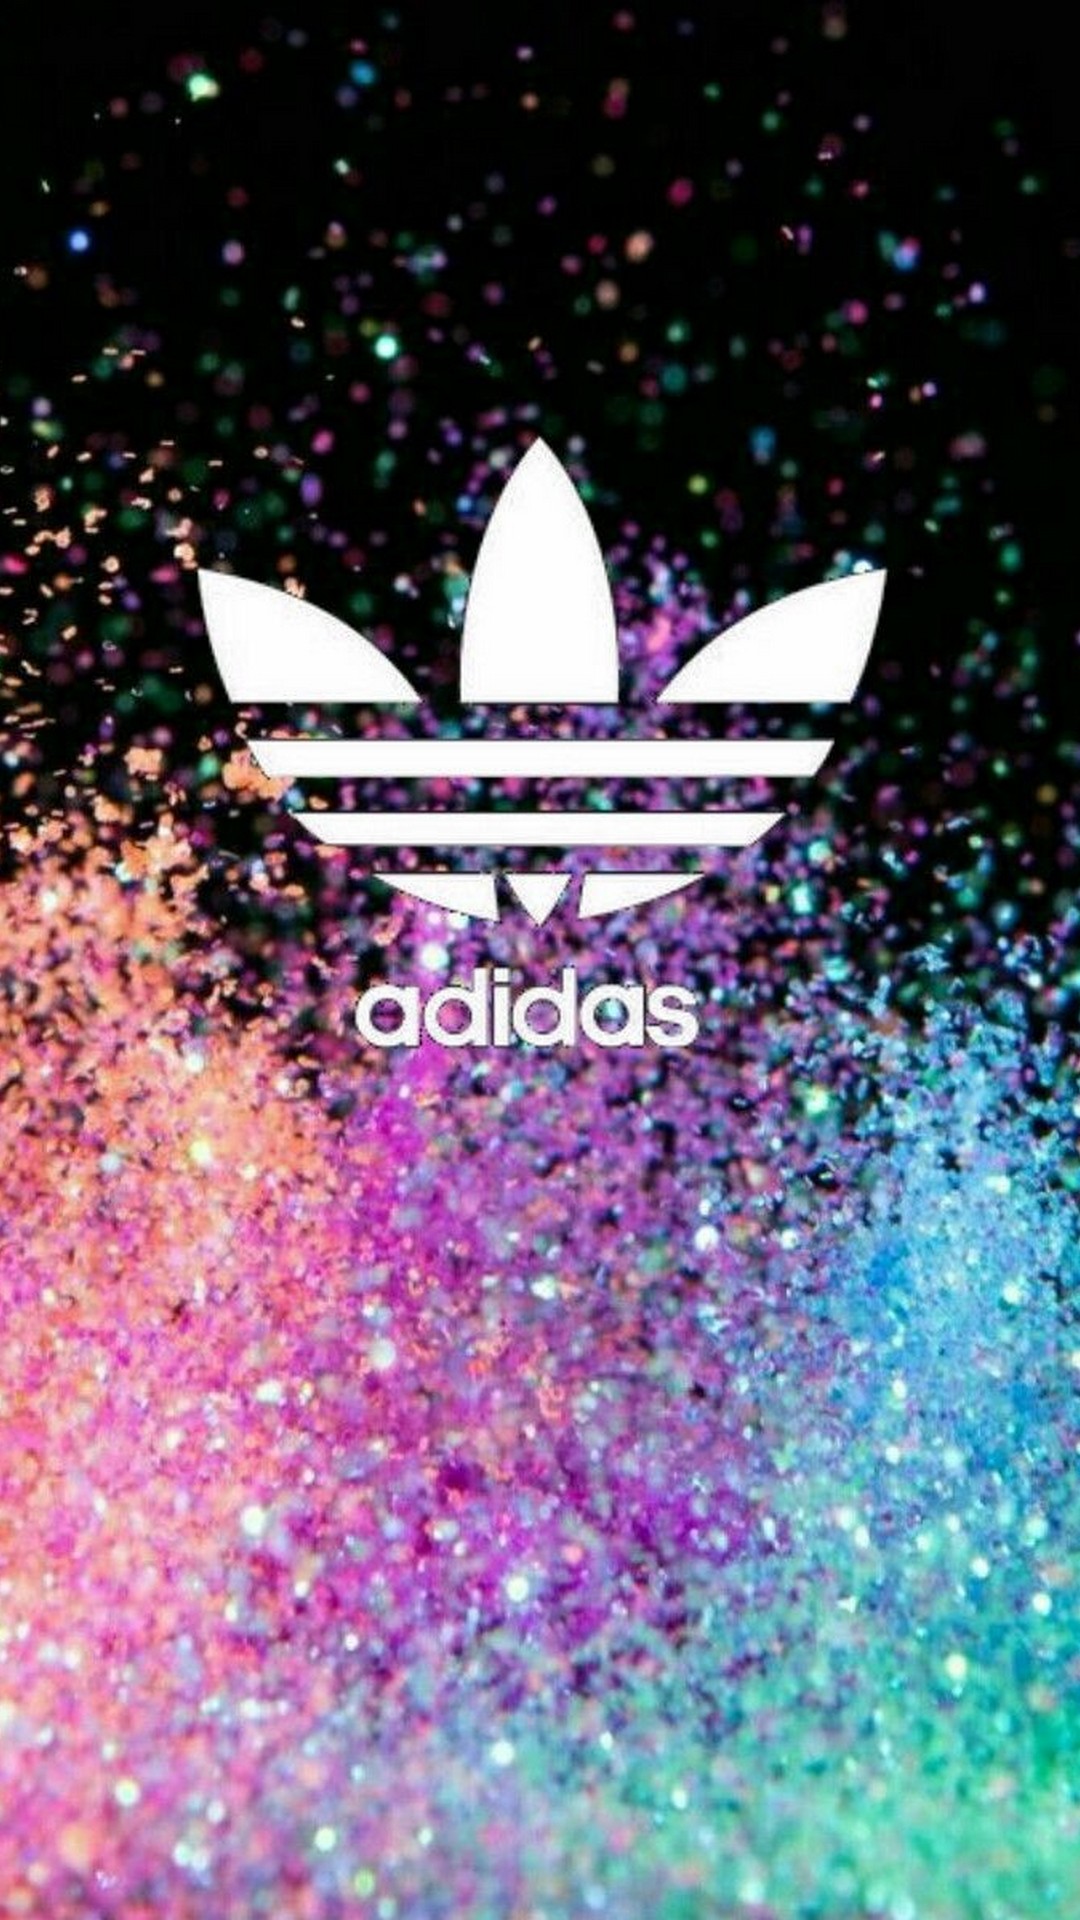 Adidas iPhone Wallpaper Design With high-resolution 1080X1920 pixel. You can set as wallpaper for Apple iPhone X, XS Max, XR, 8, 7, 6, SE, iPad. Enjoy and share your favorite HD wallpapers and background images